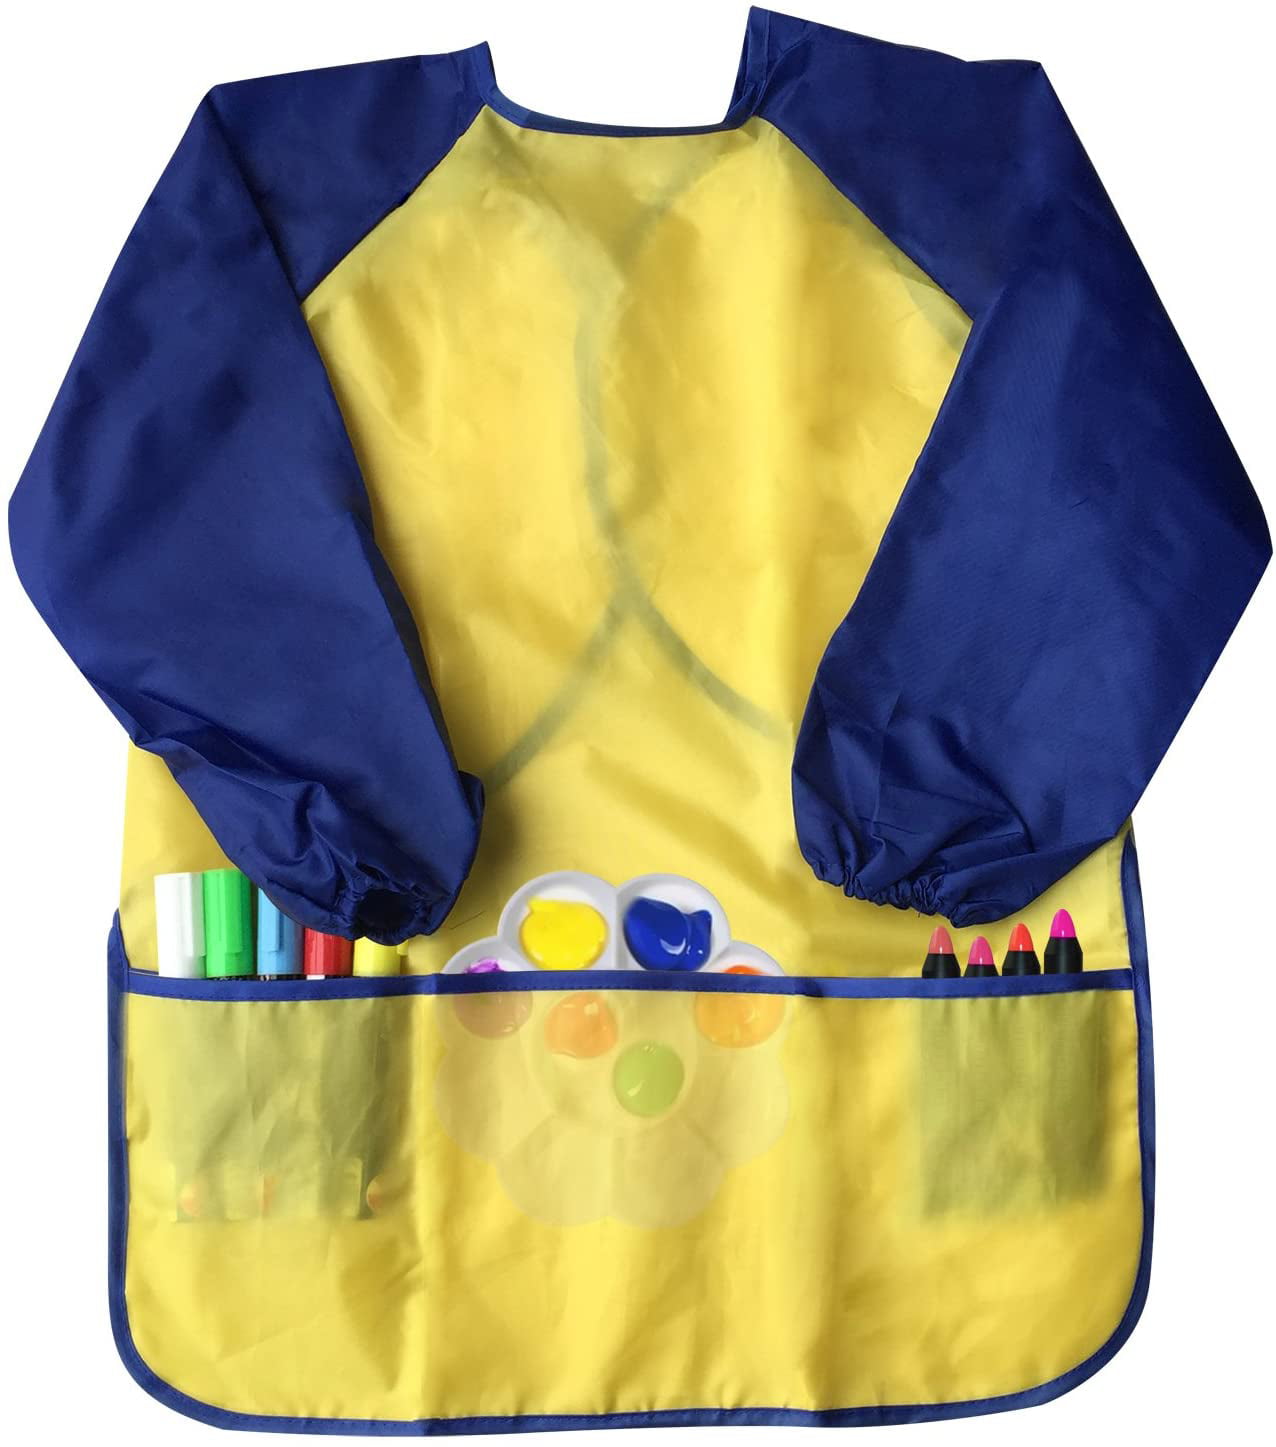 Hosim Childrens Art Smock Long Sleeve Waterproof Painting Apron Ideal for Painting/Kitchen/Baking L, Pink Kids Lovely Monkey Artist Smocks Play Apron with Large Pocket 